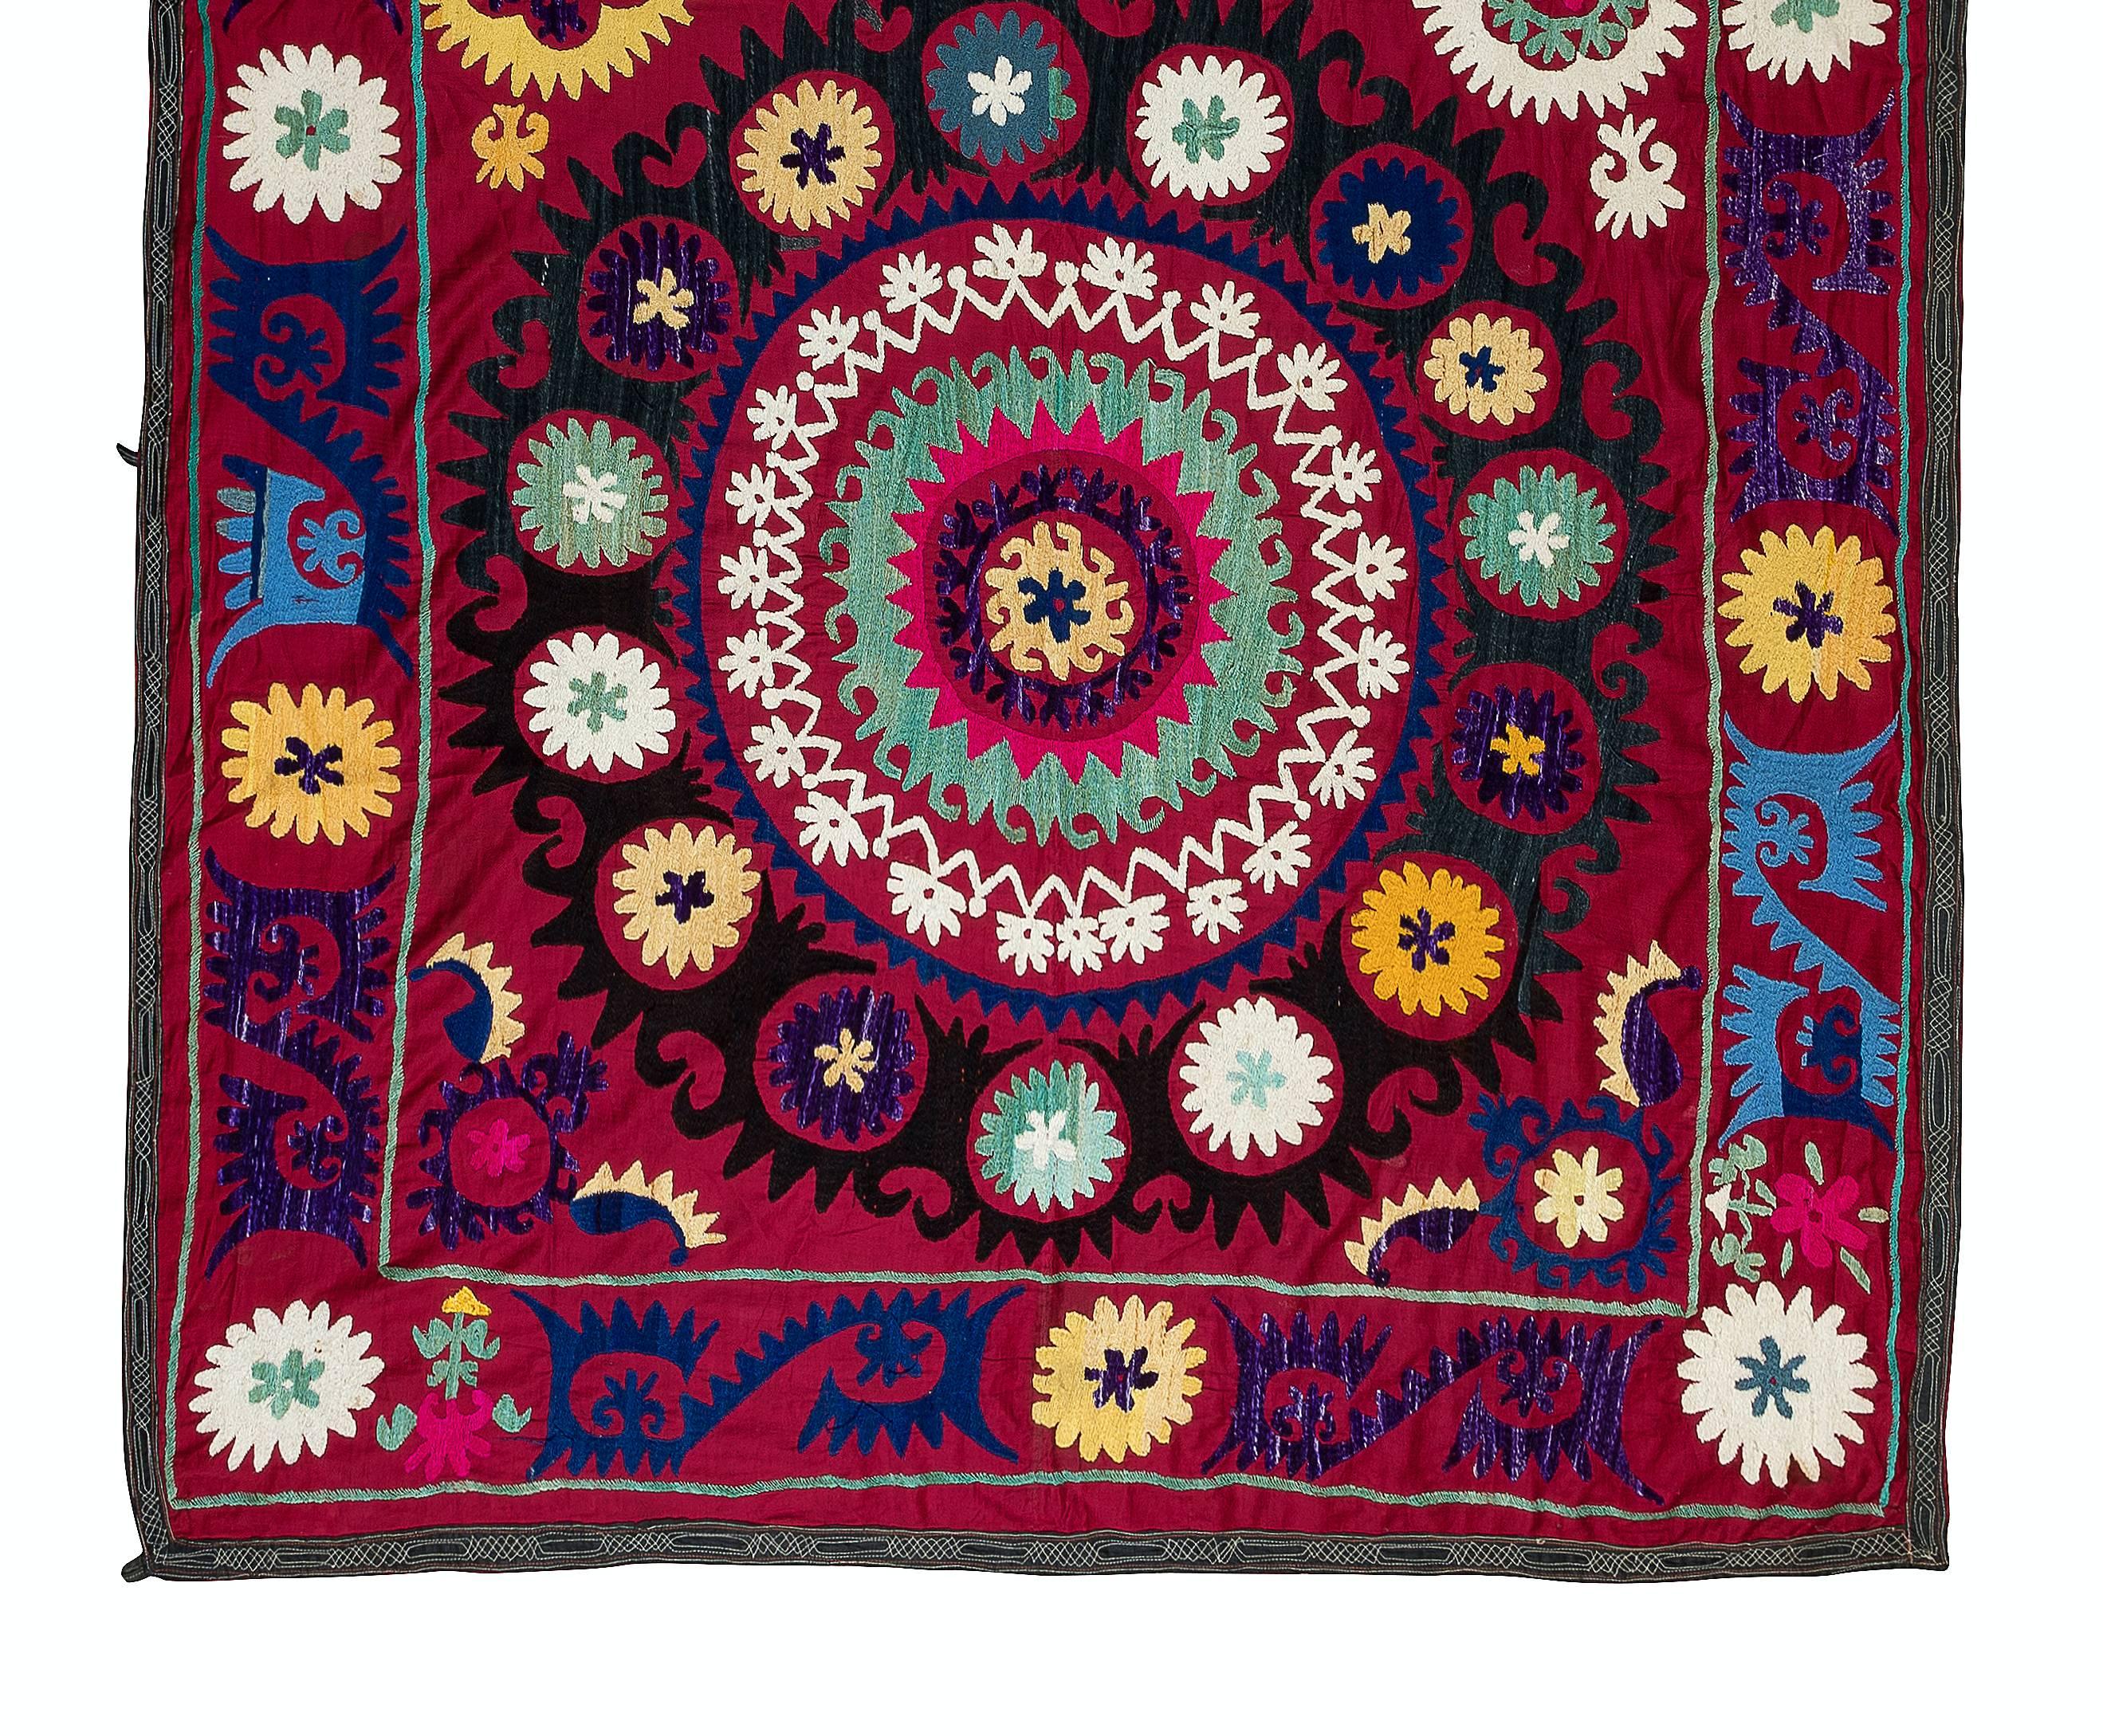 Embroidered 1970s Uzbek Silk Embroidery Wall Hanging, Red Suzani Fabric Bedspread For Sale